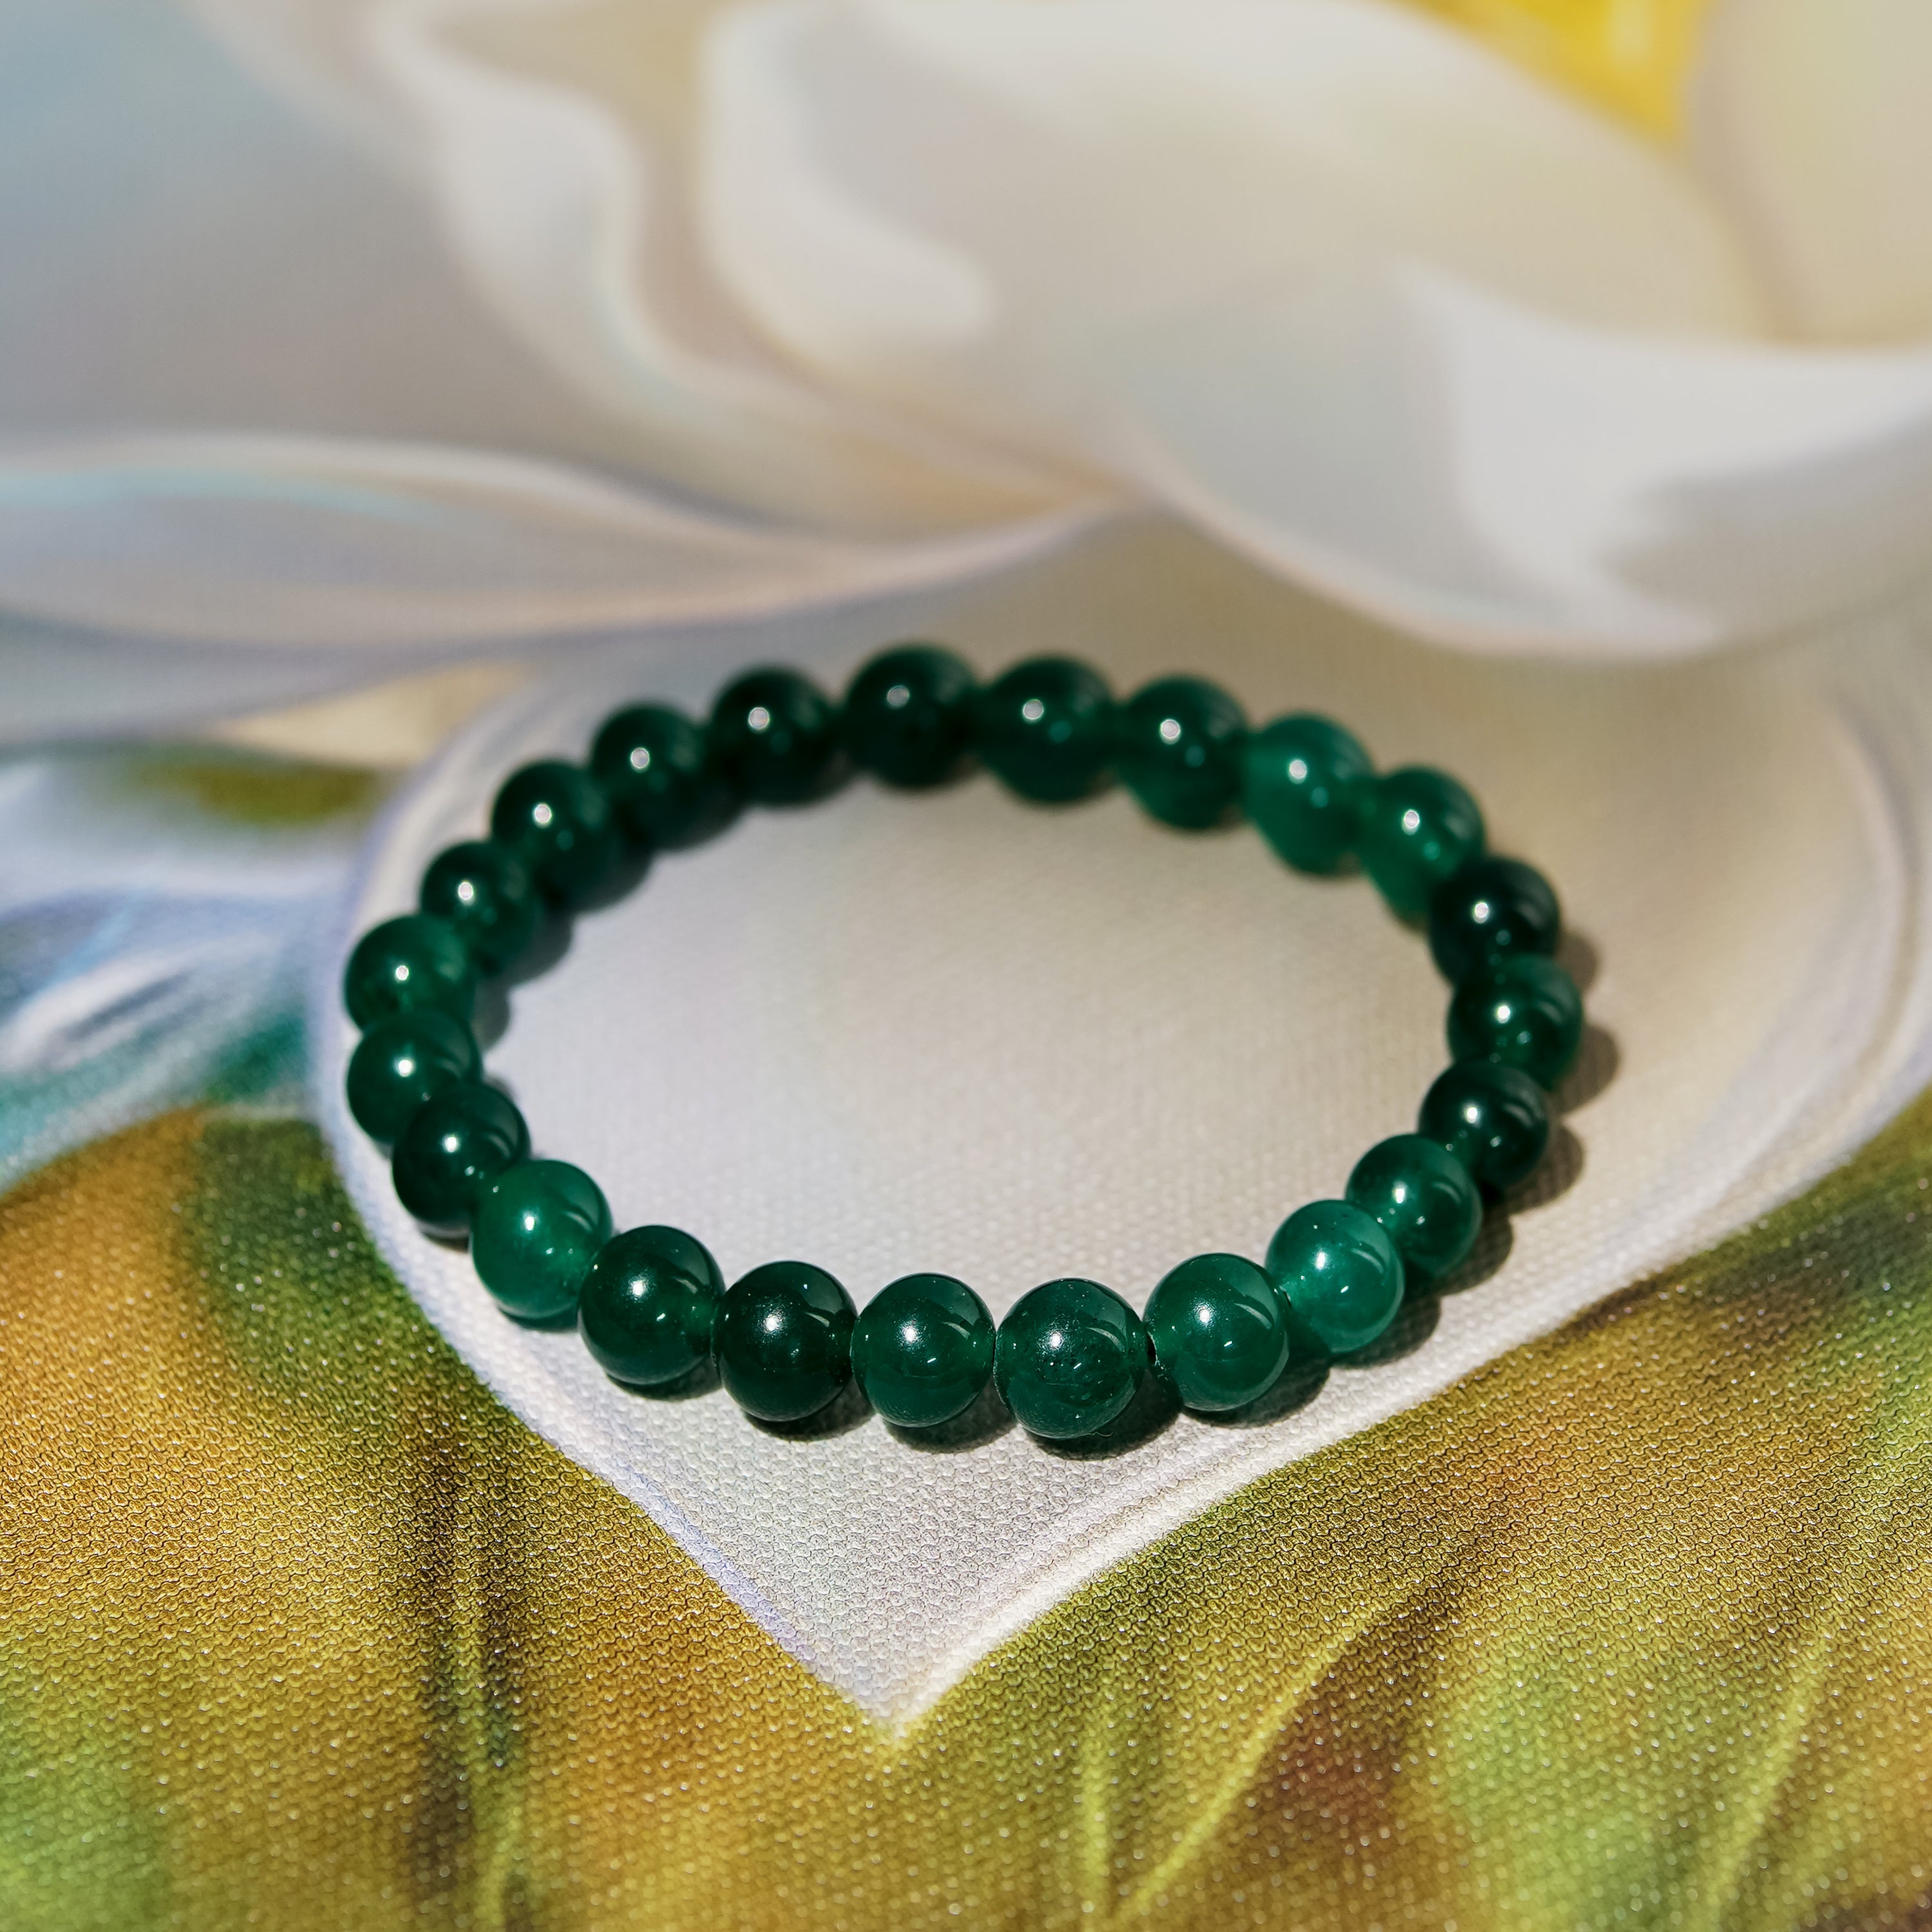 What Is The Most Valuable Color of Jade? – Baikalla